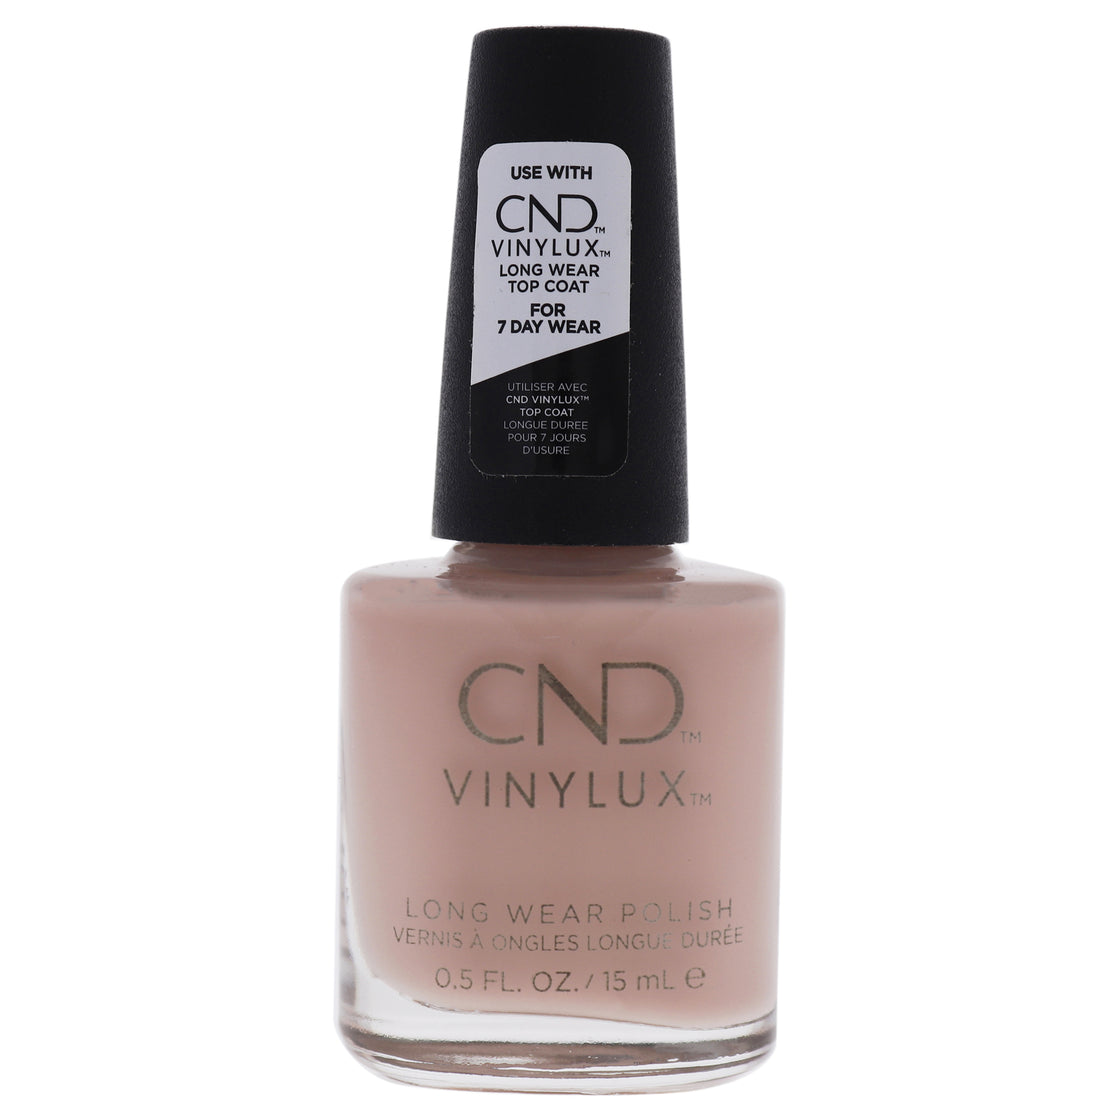 Vinylux Weekly Polish - 267 Uncovered by CND for Women - 0.5 oz Nail Polish